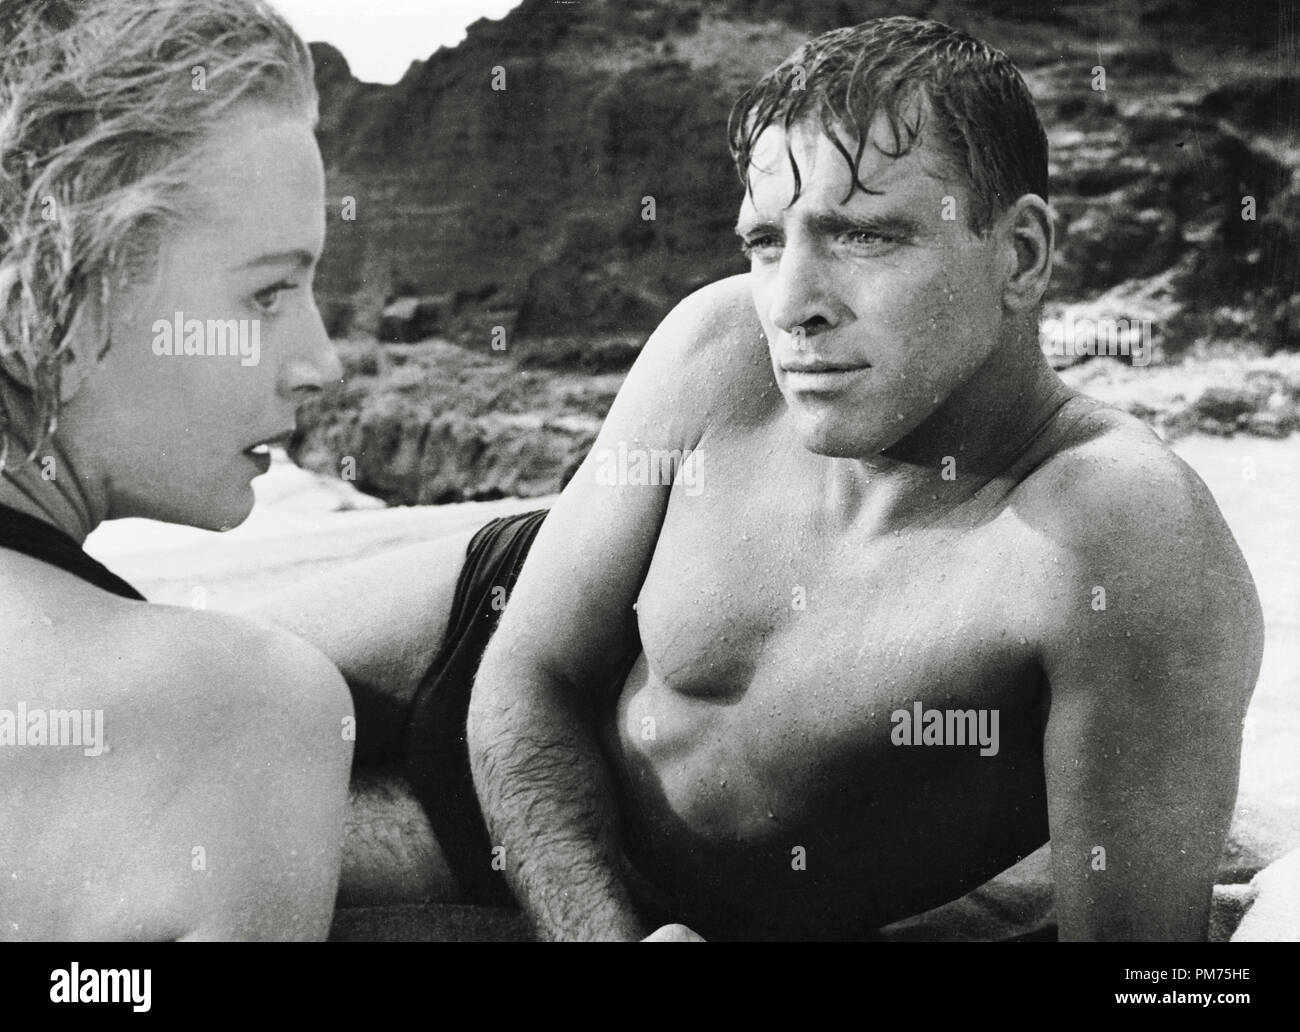 Burt Lancaster and Deborah Kerr, 'From Here to Eternity' 1953 Columbia  File Reference # 30928 596THA Stock Photo